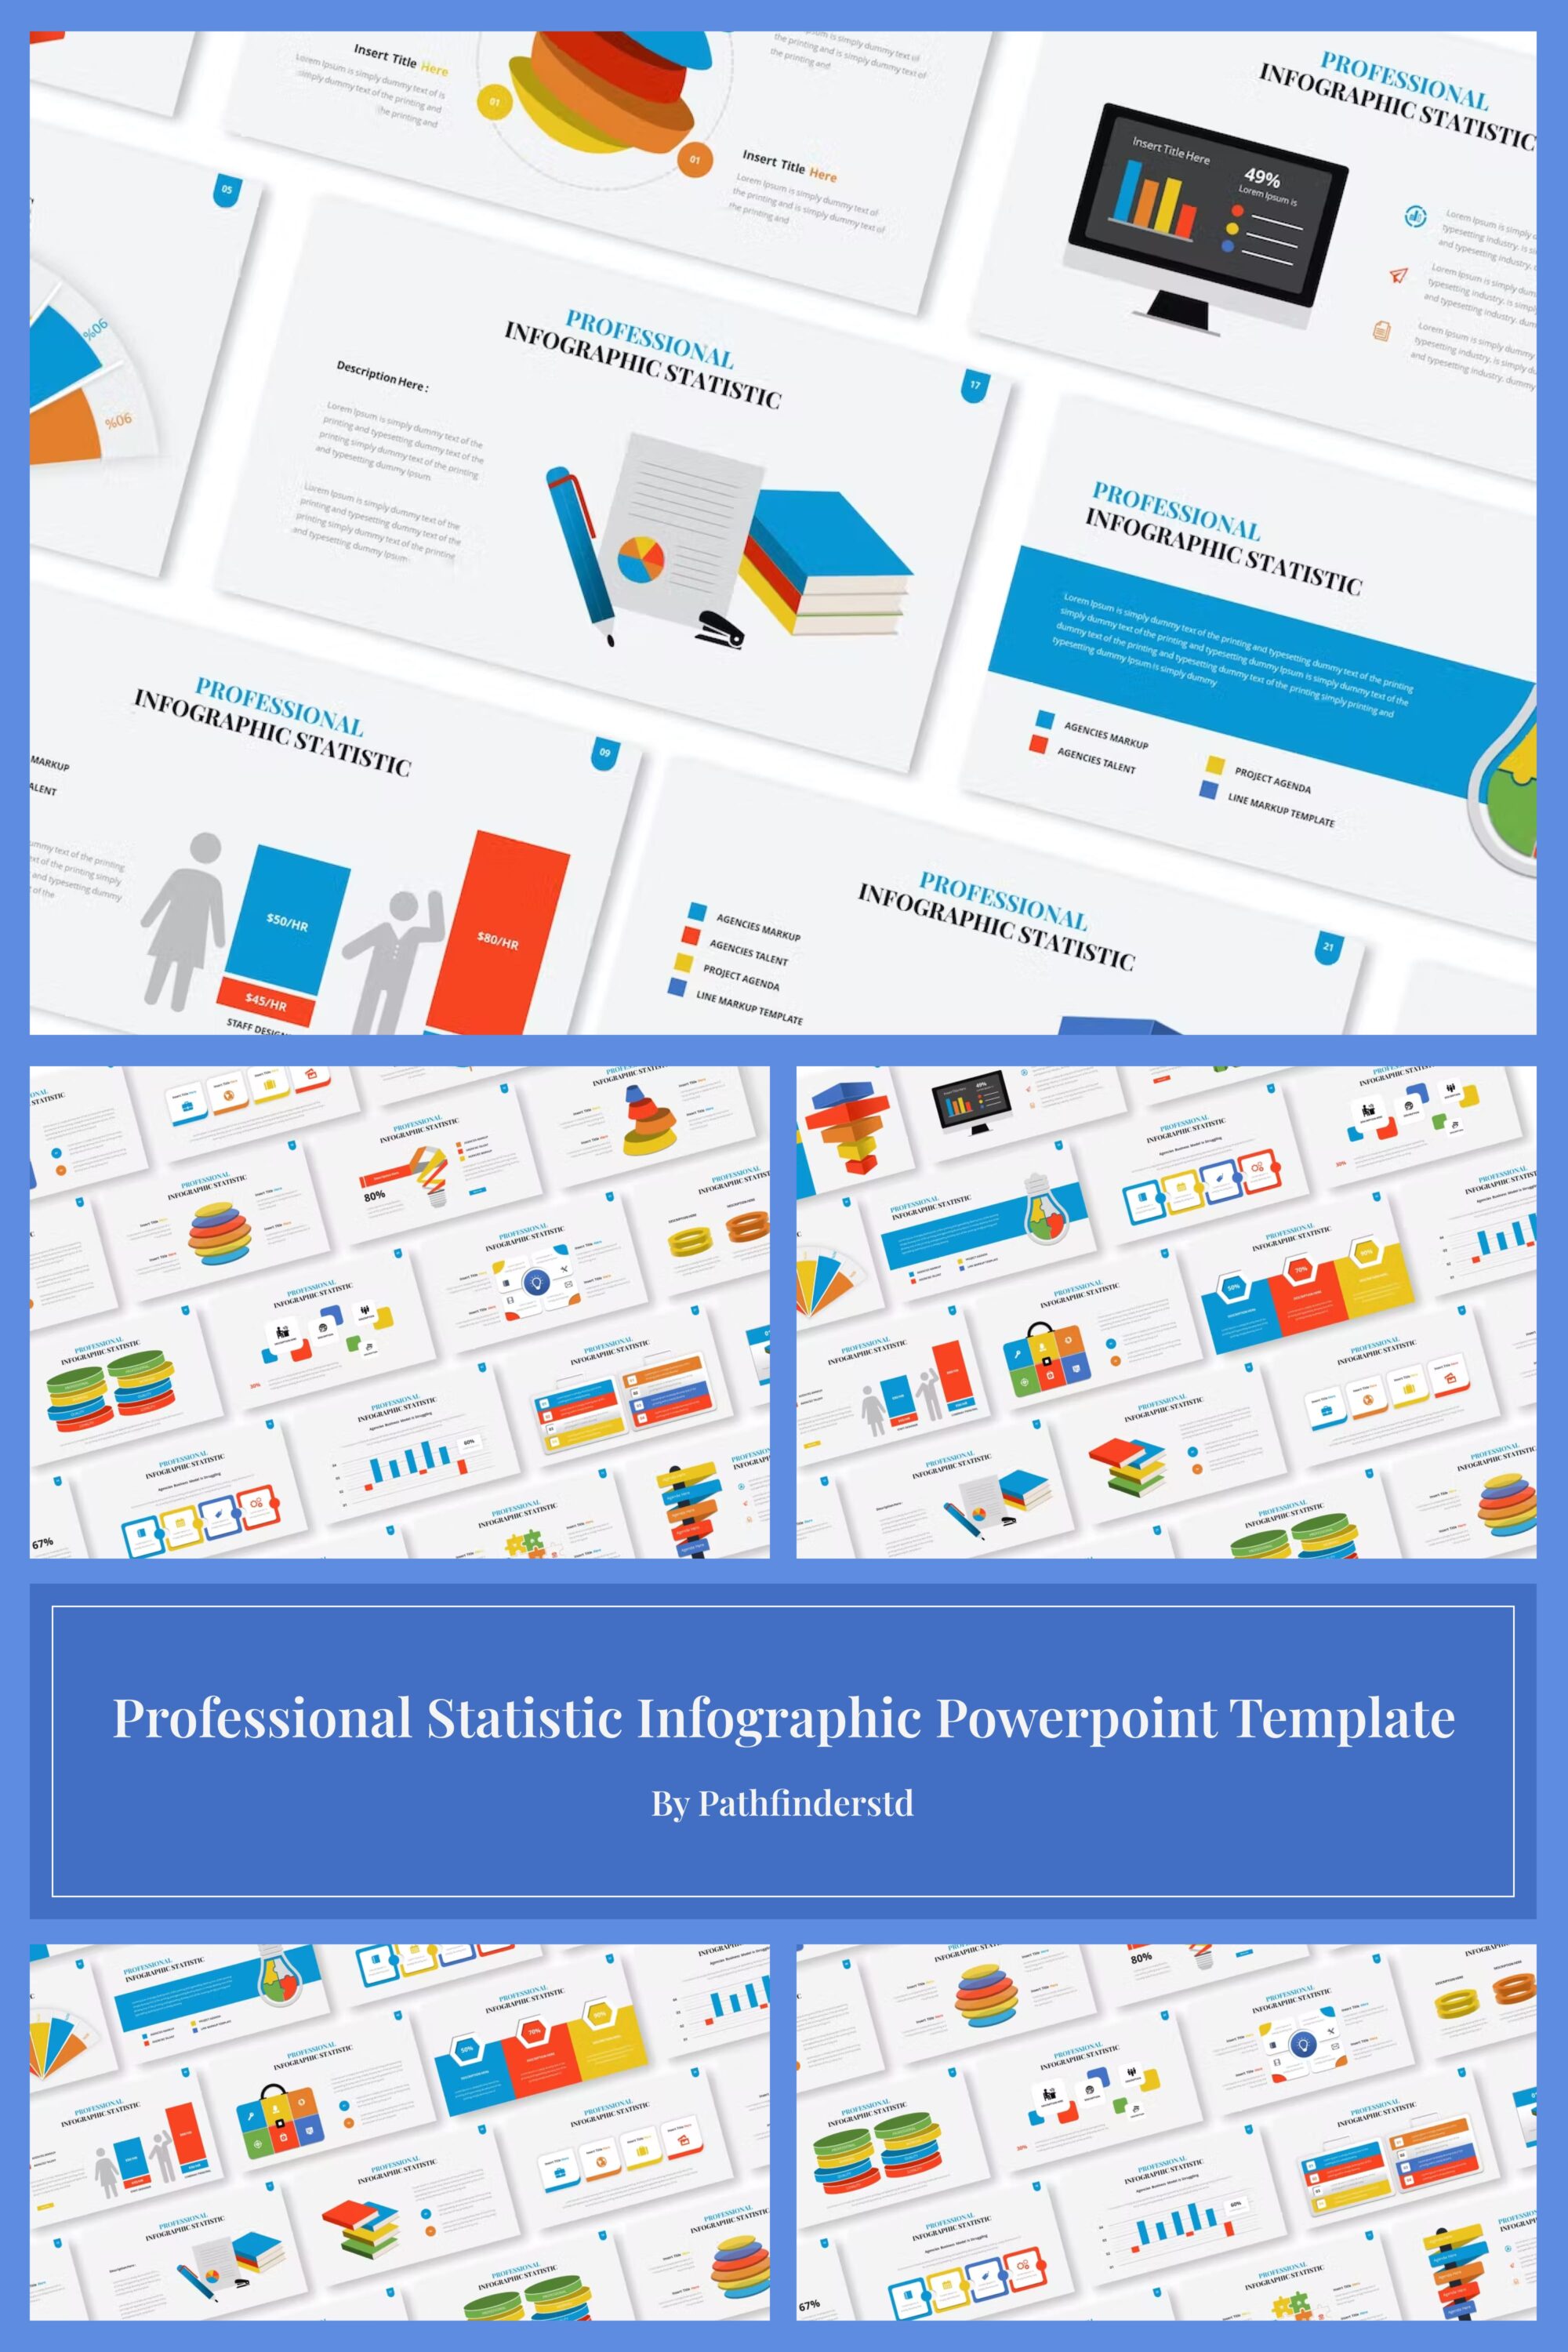 Professional Statistic Infographic PowerPoint Template - pinterest image preview.